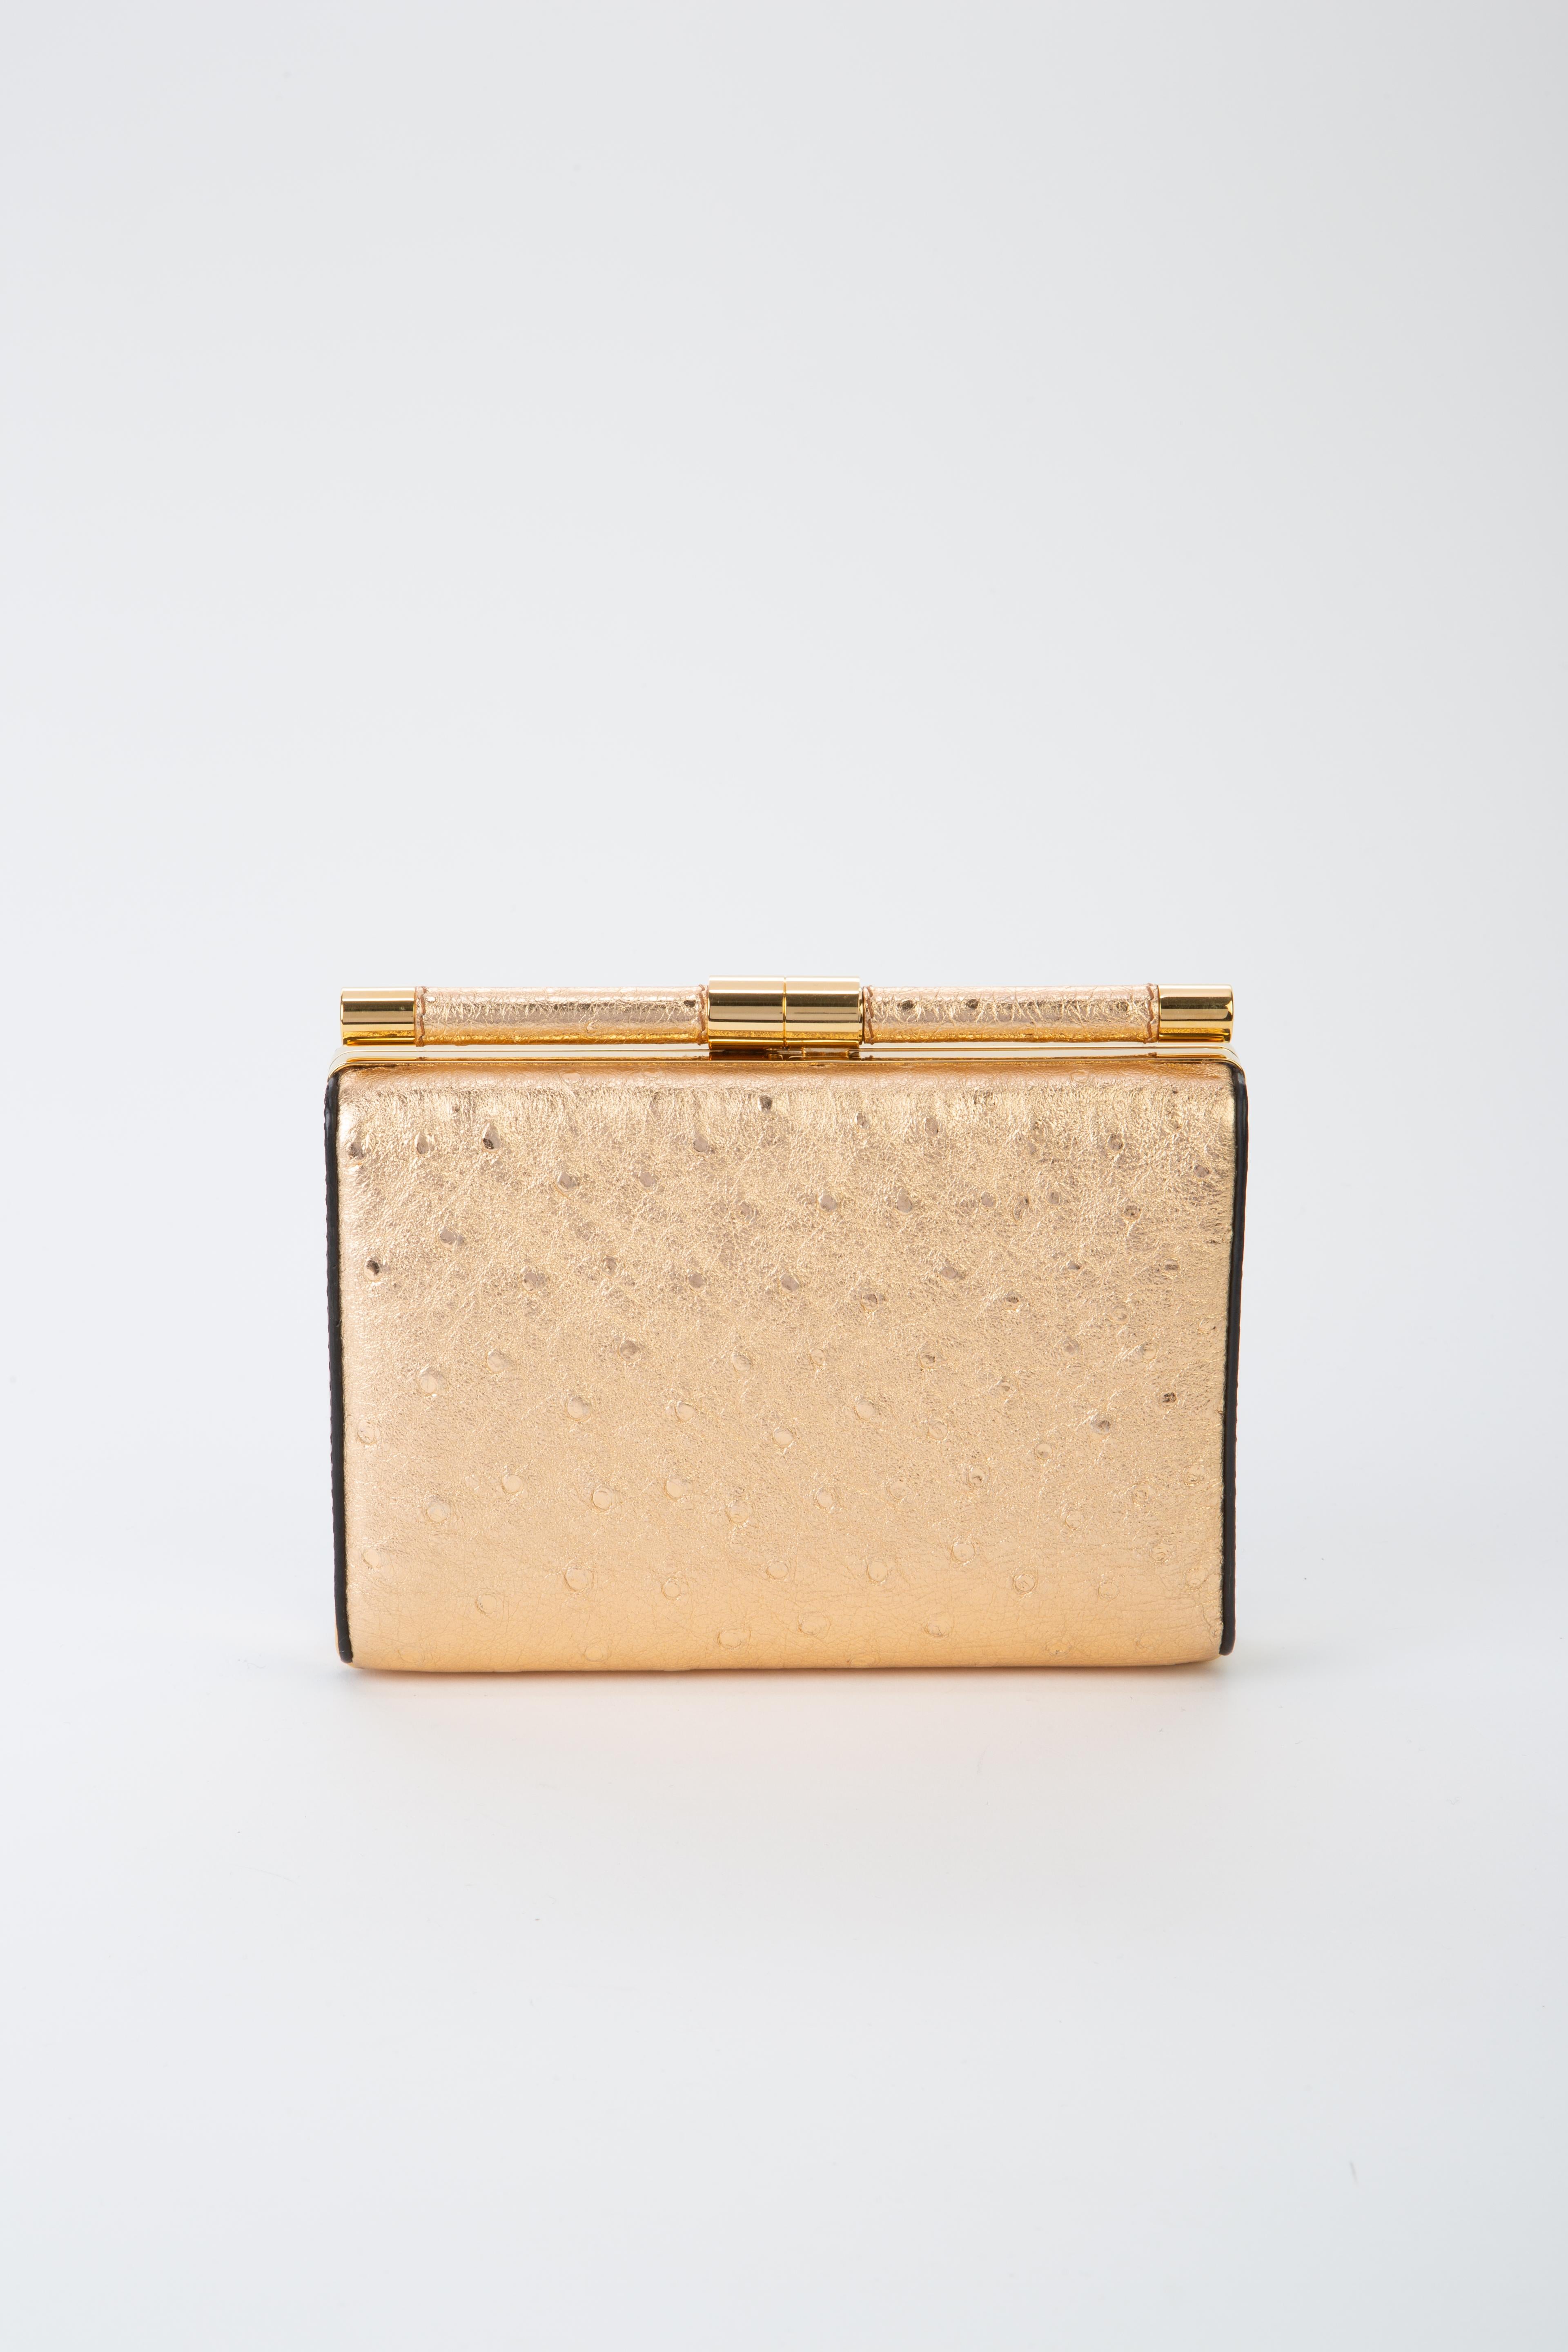 TYLER ELLIS Jamie Clutch Small Black Patent Python + Gold Ostrich Gold Hardware In New Condition In Los Angeles, CA